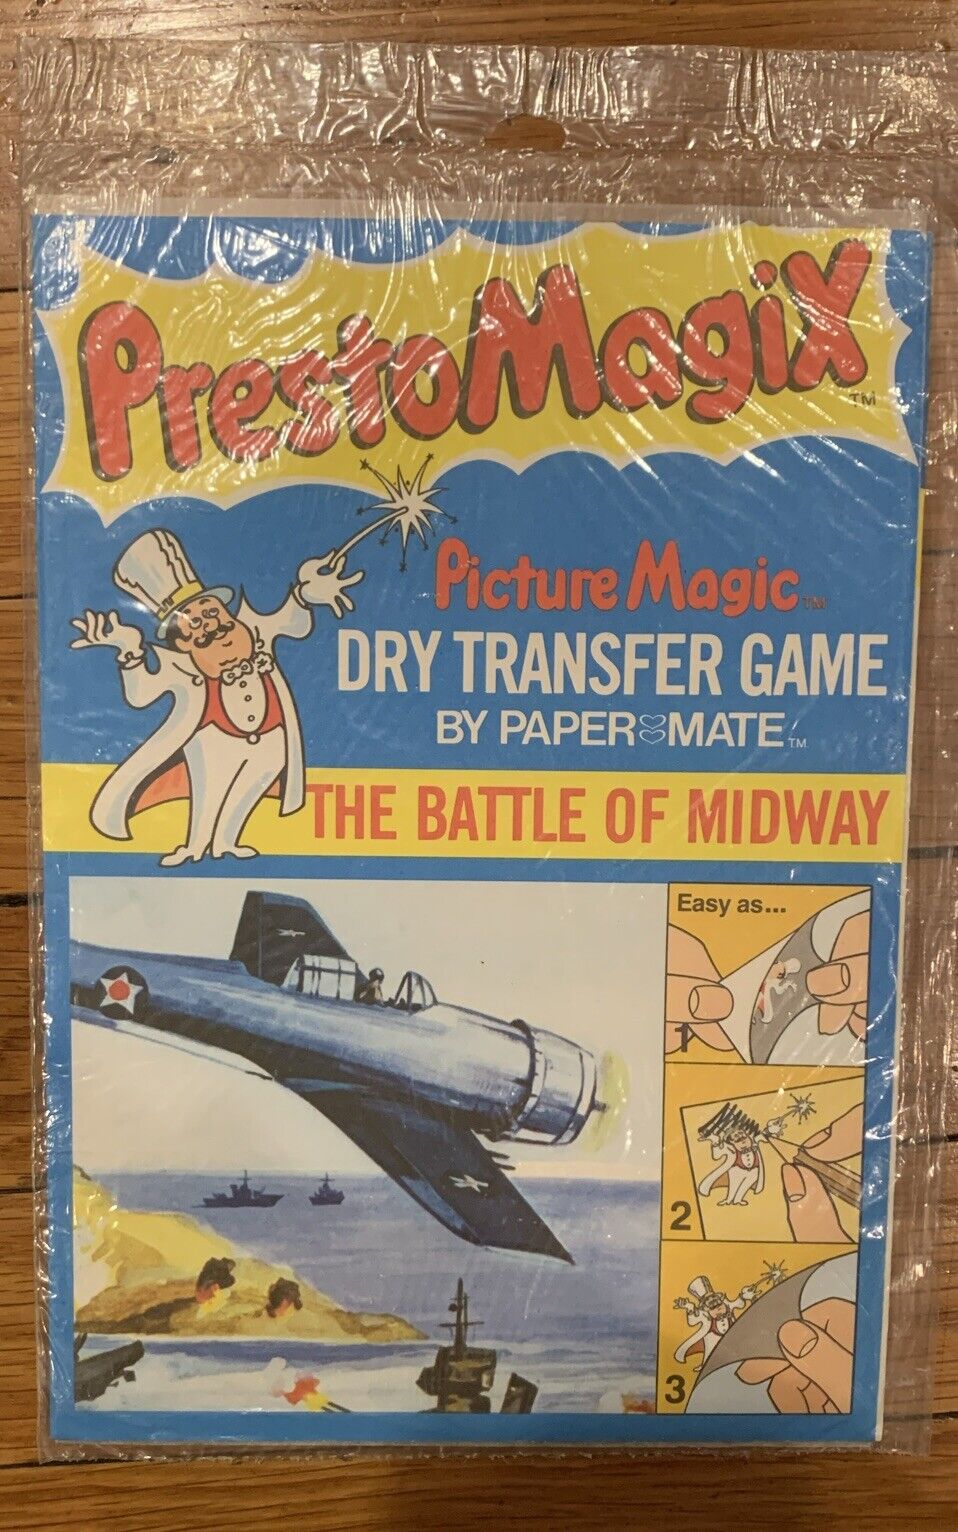 New 1978 Presto Magix- The Battle Of Midway